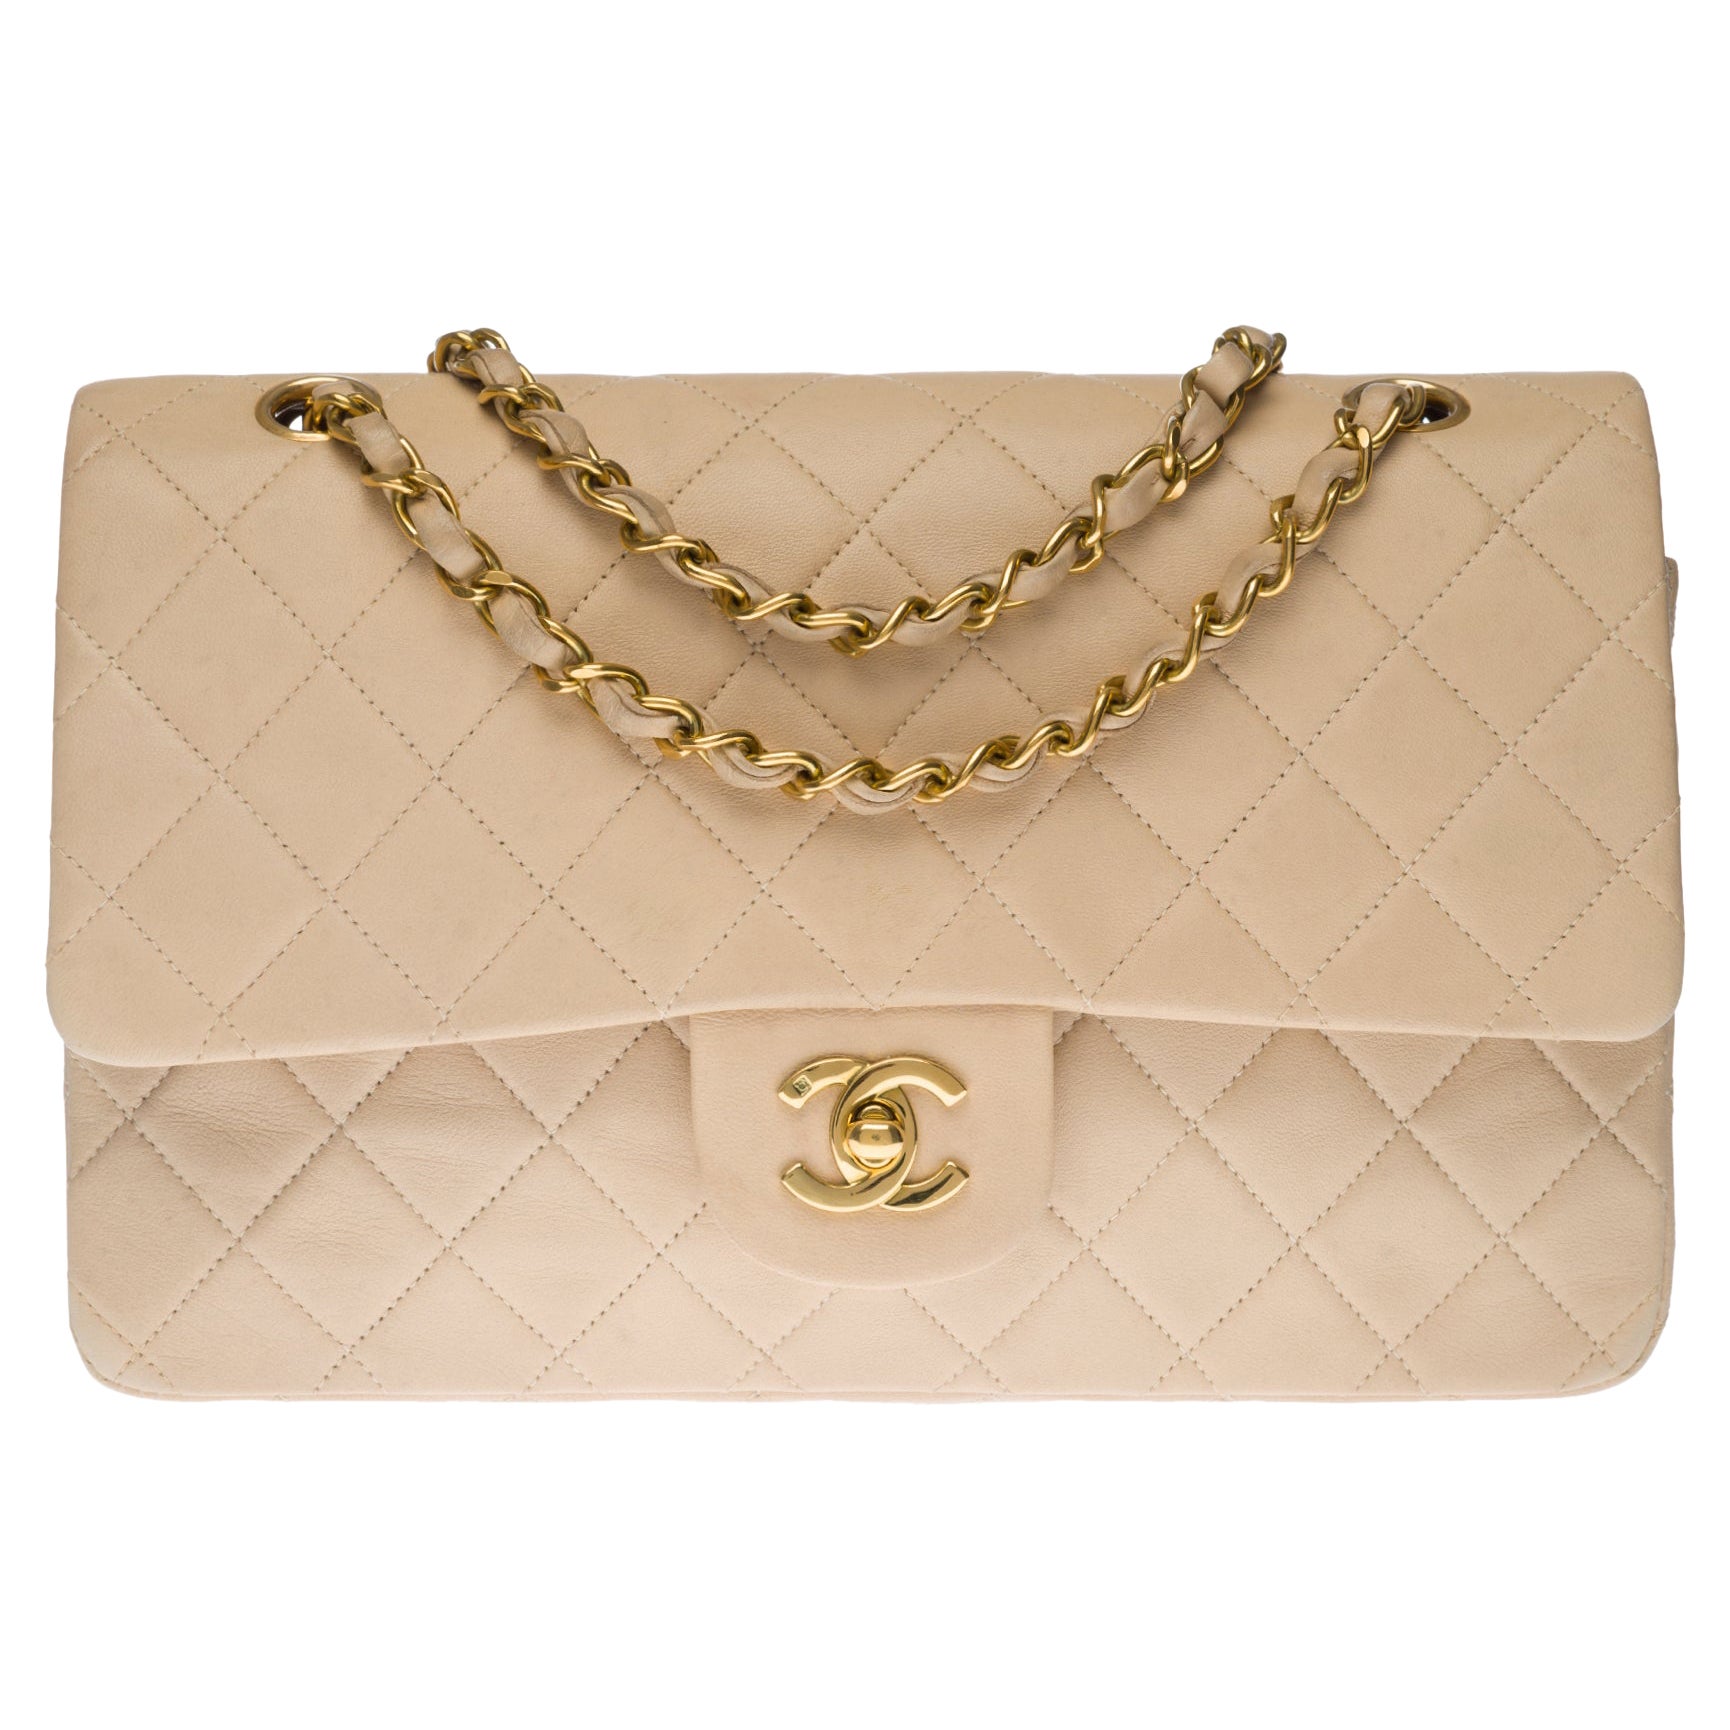 Chanel Timeless Medium double flap Shoulder bag in beige quilted leather, GHW